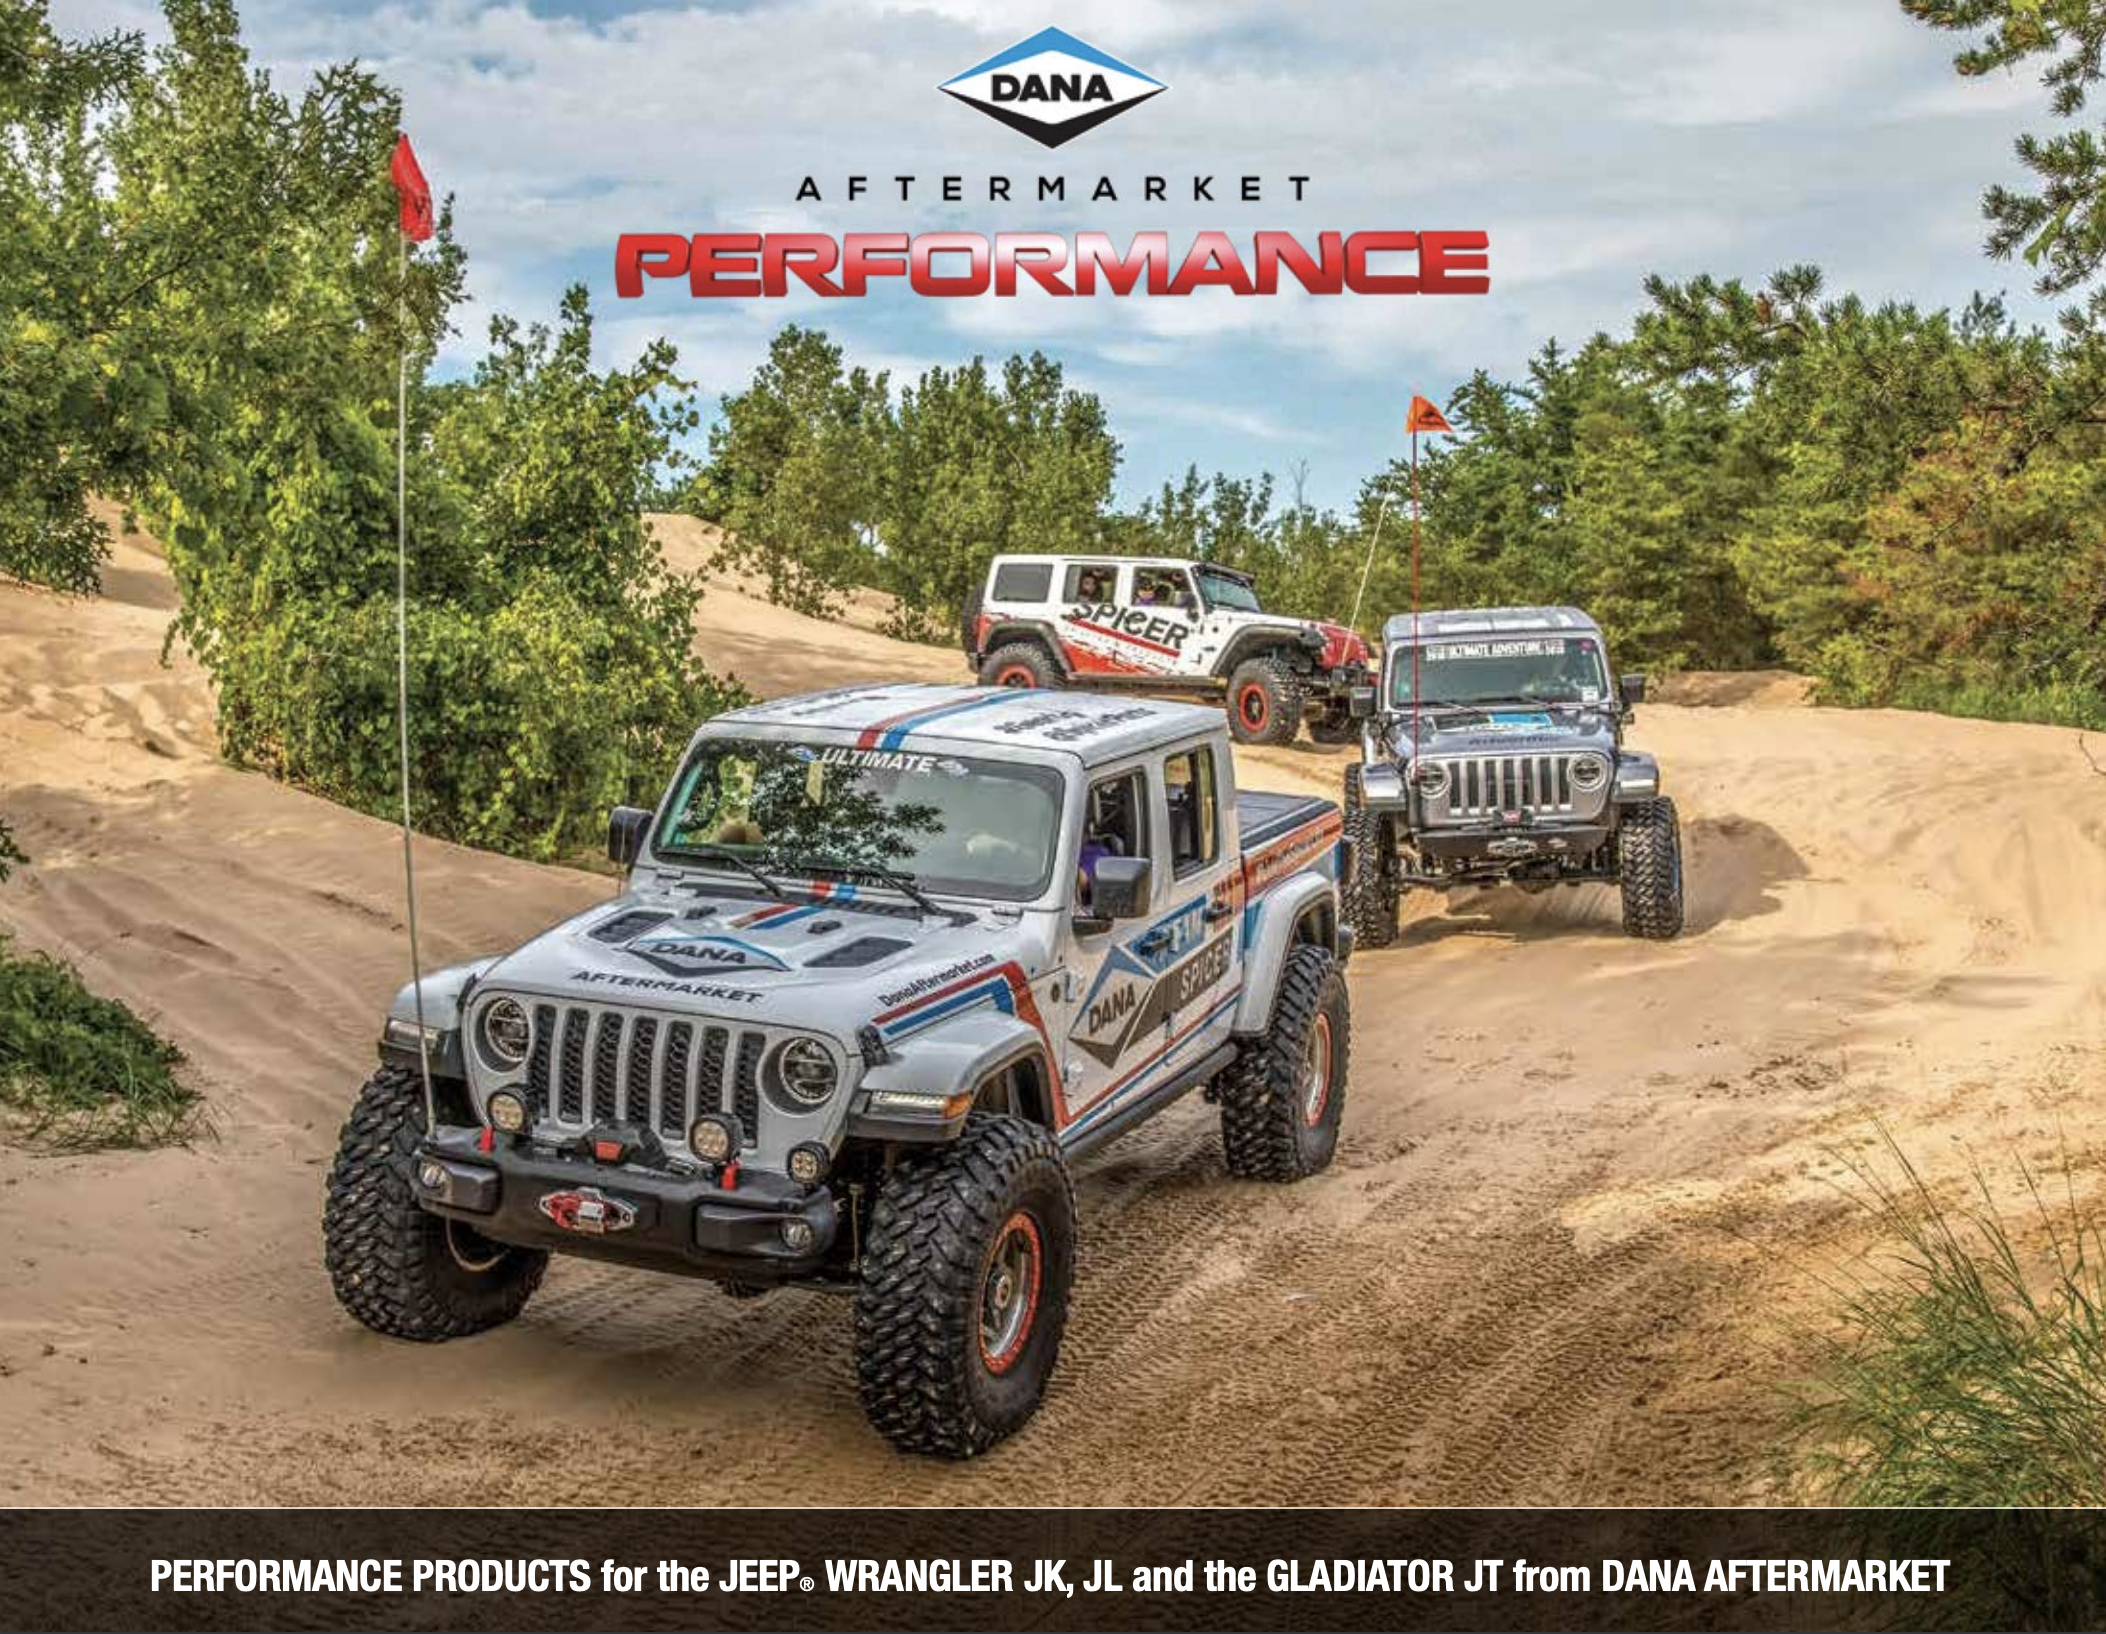 Products for the Jeep Wrangler JK and JL